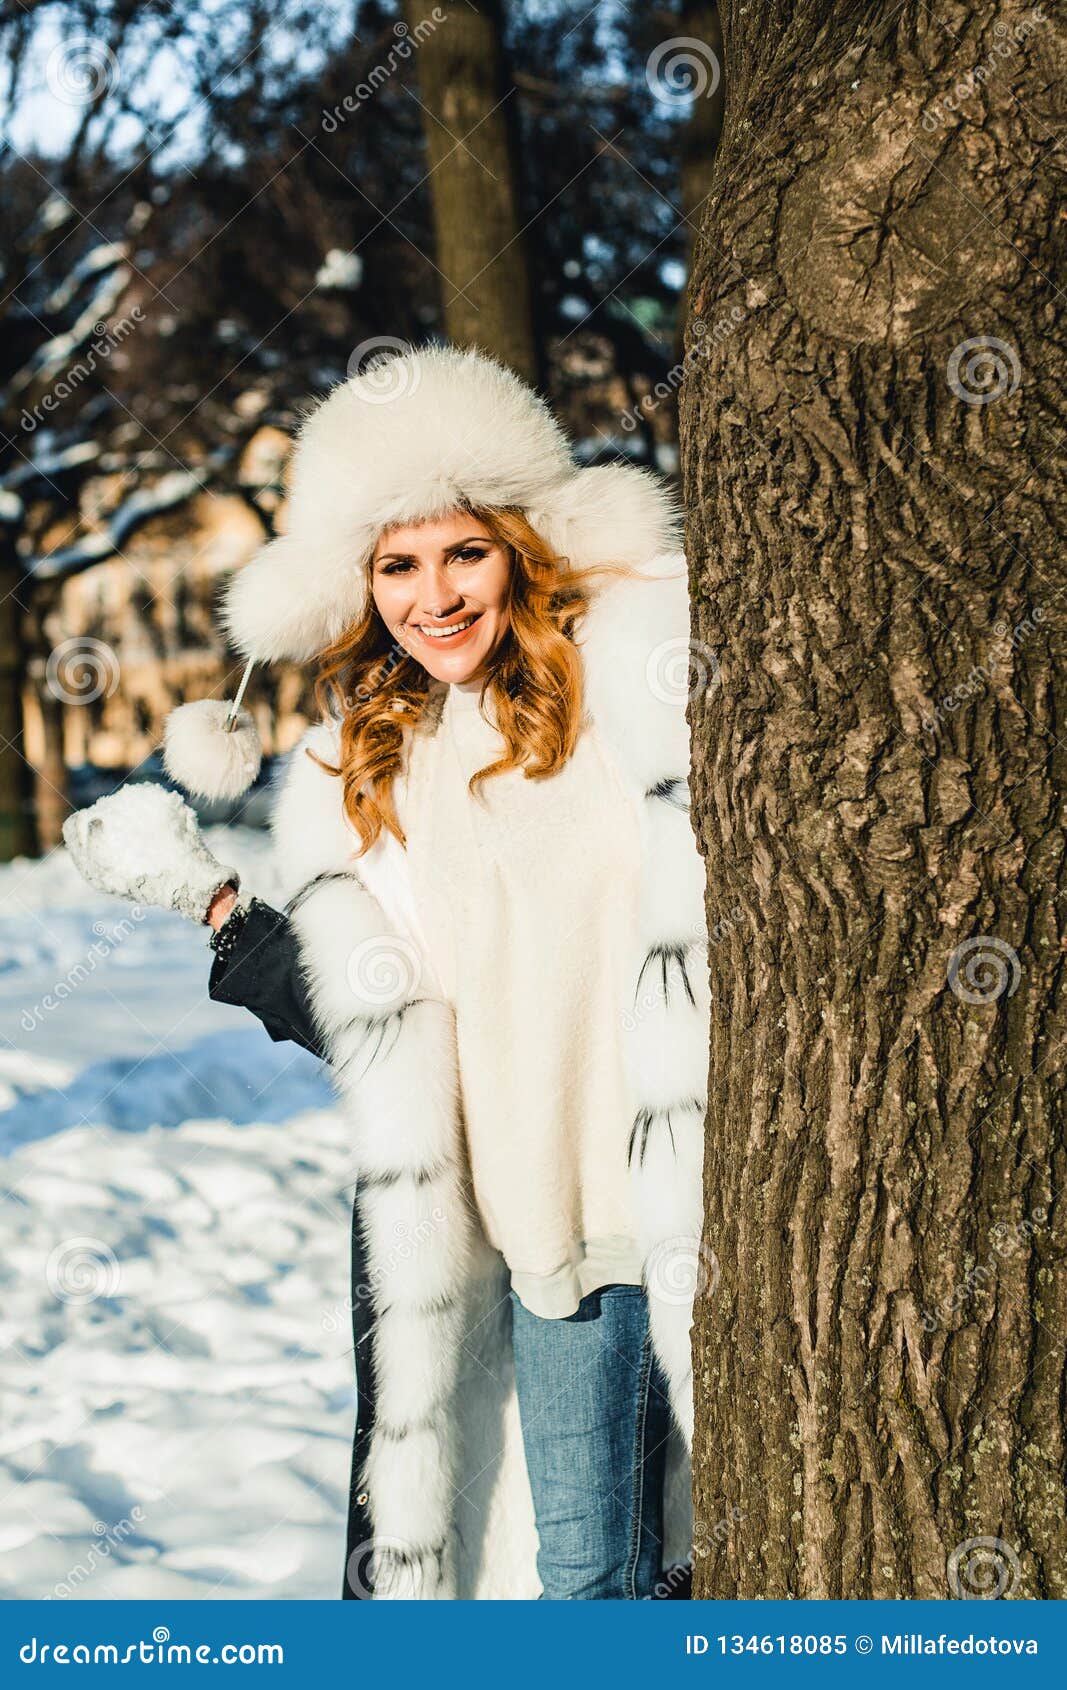 Winter Portrait of Happy Woman with Snowball Outdoor Stock Image ...